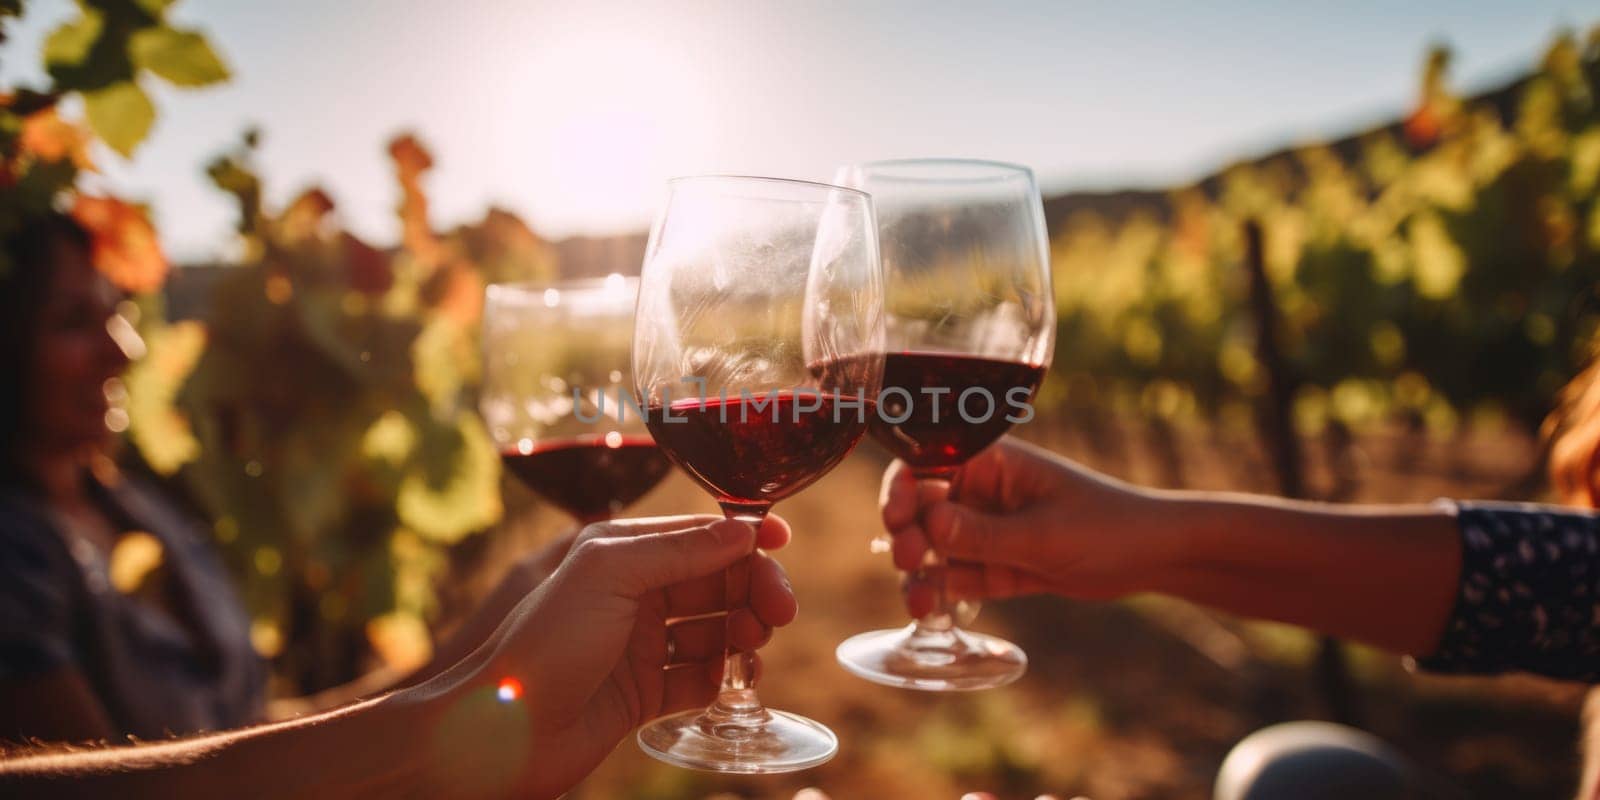 Group of friends gathering for wine tasting in countryside vineyard in summer harvesting season cheering and toasting with friendship comeliness